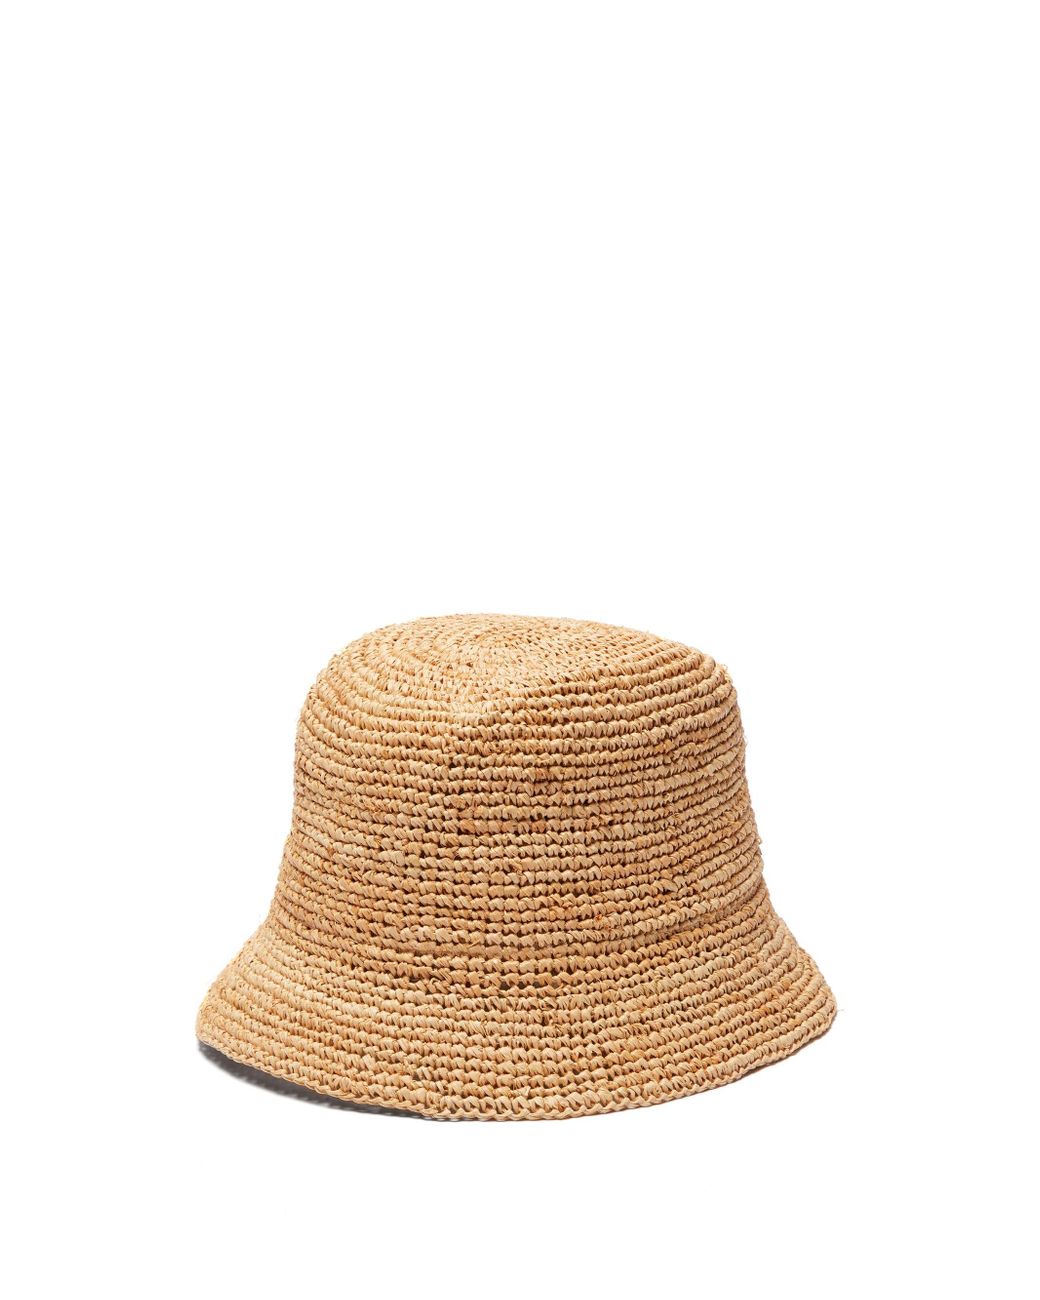 Gucci Straw Bucket Hat in Natural | Lyst